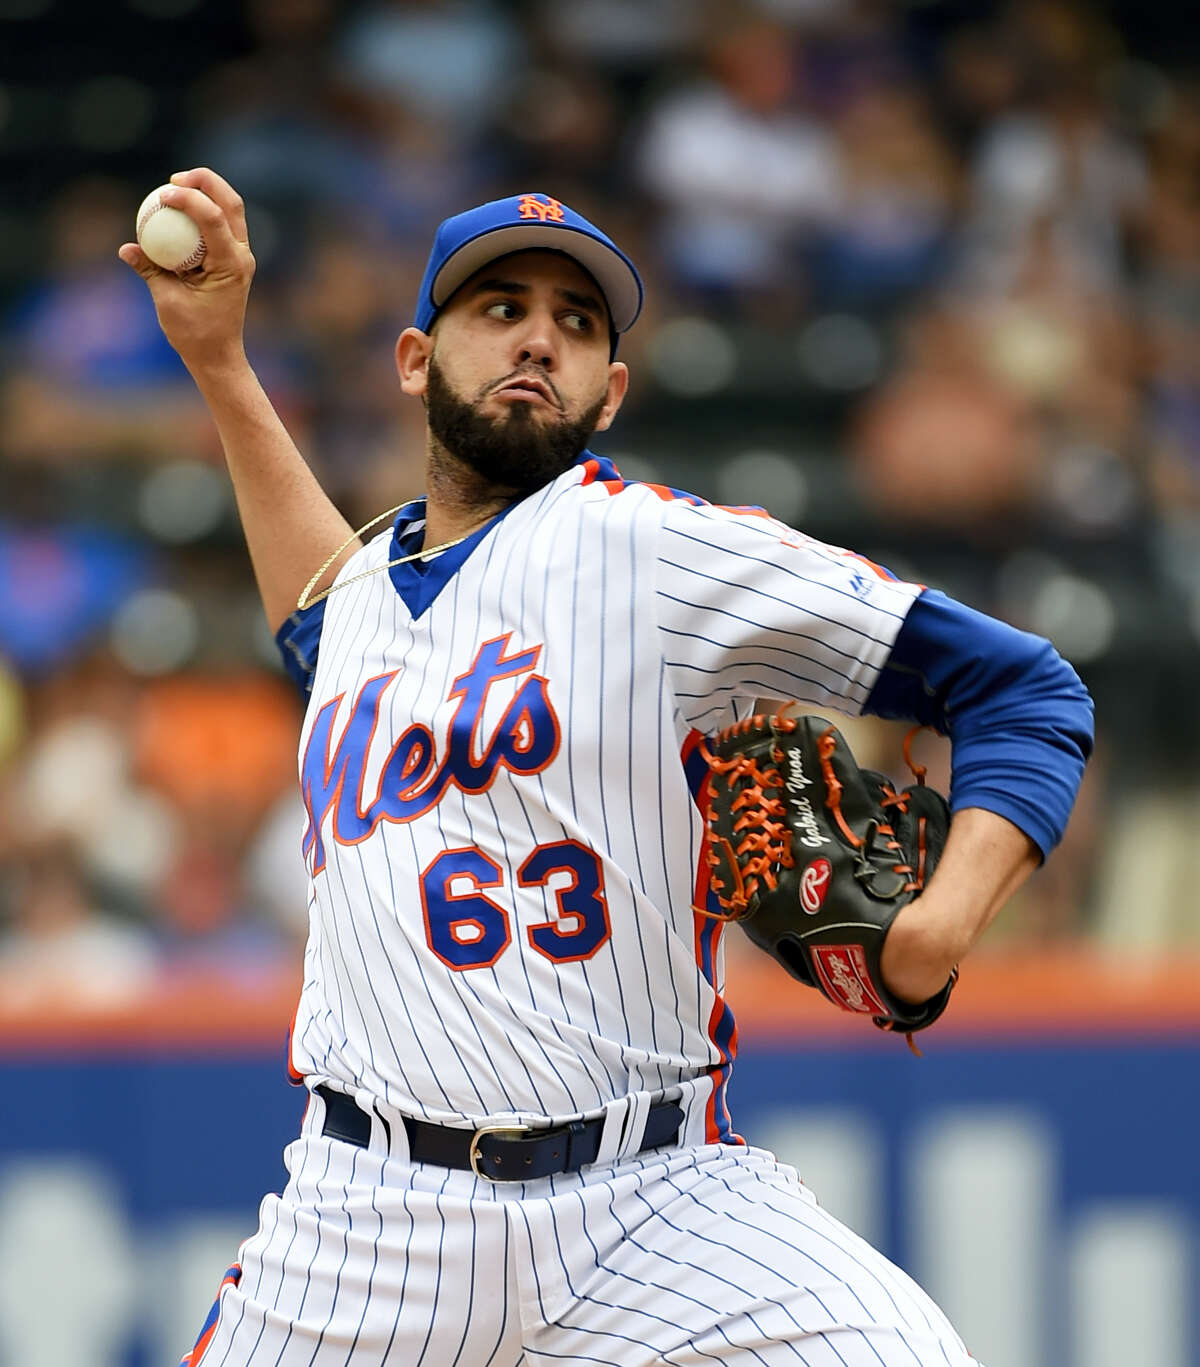 Mets starting pitcher Gabriel Ynoa delivers against the Twins on Sunday.